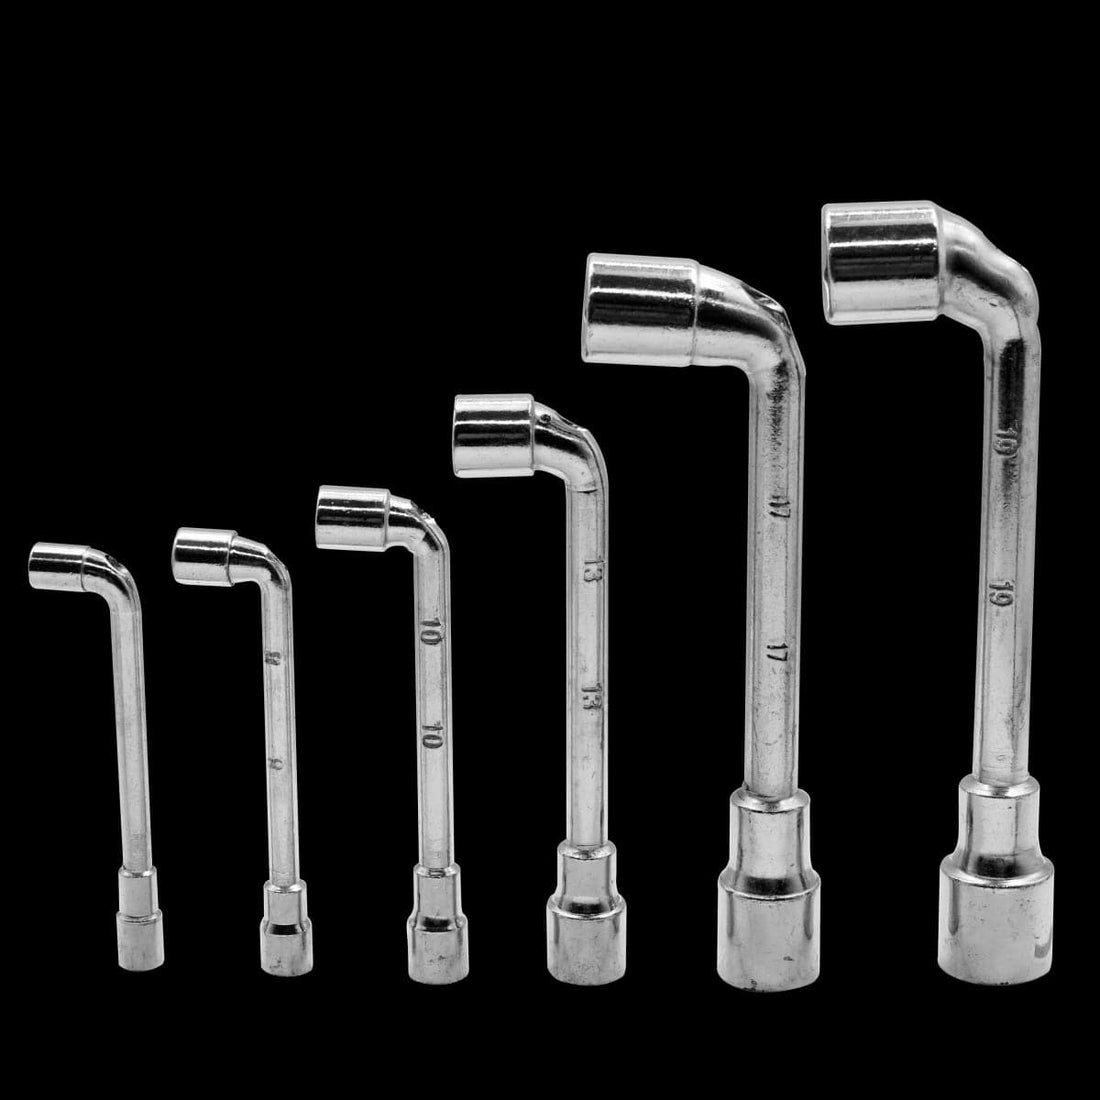 SET 6 FORGED STEEL PIPE SPANNERS ASSORTED SIZES - best price from Maltashopper.com BR400002968